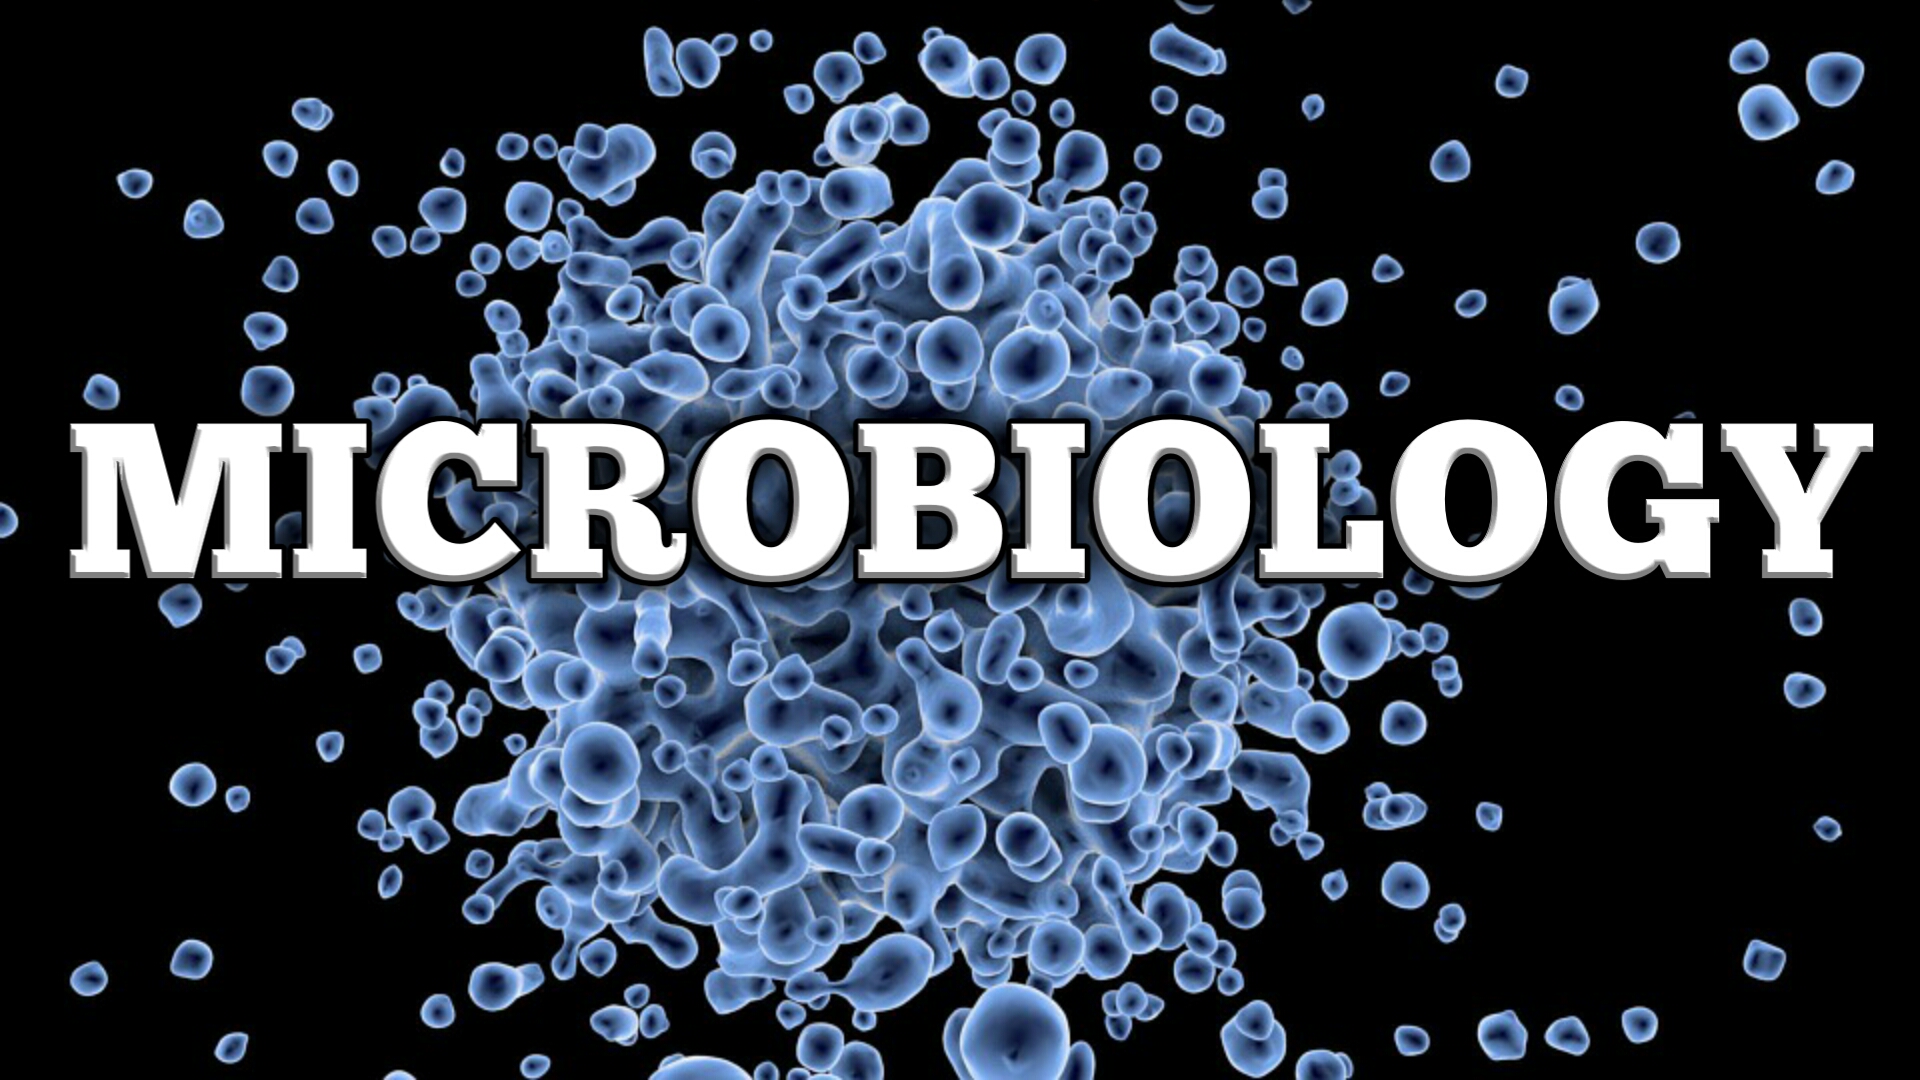 B.Sc MICROBIOLOGY - CAREERS,,DEGREE,Job Opportunities,Salary,M.Sc